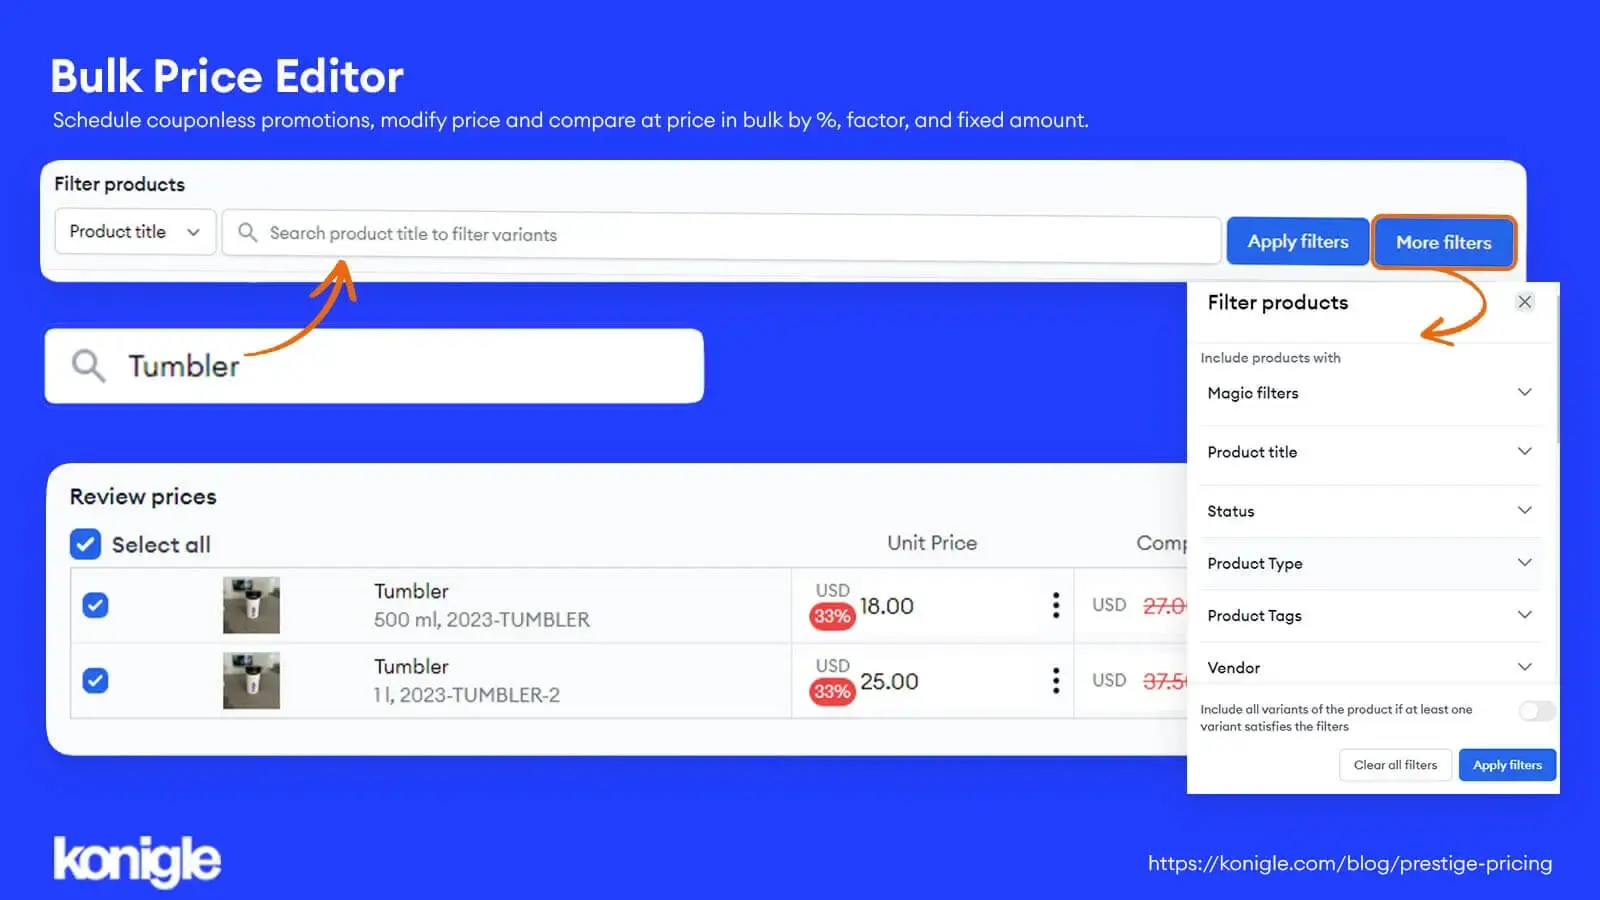 Creating pricing by filtering through products with options like "Draft" or "Active".